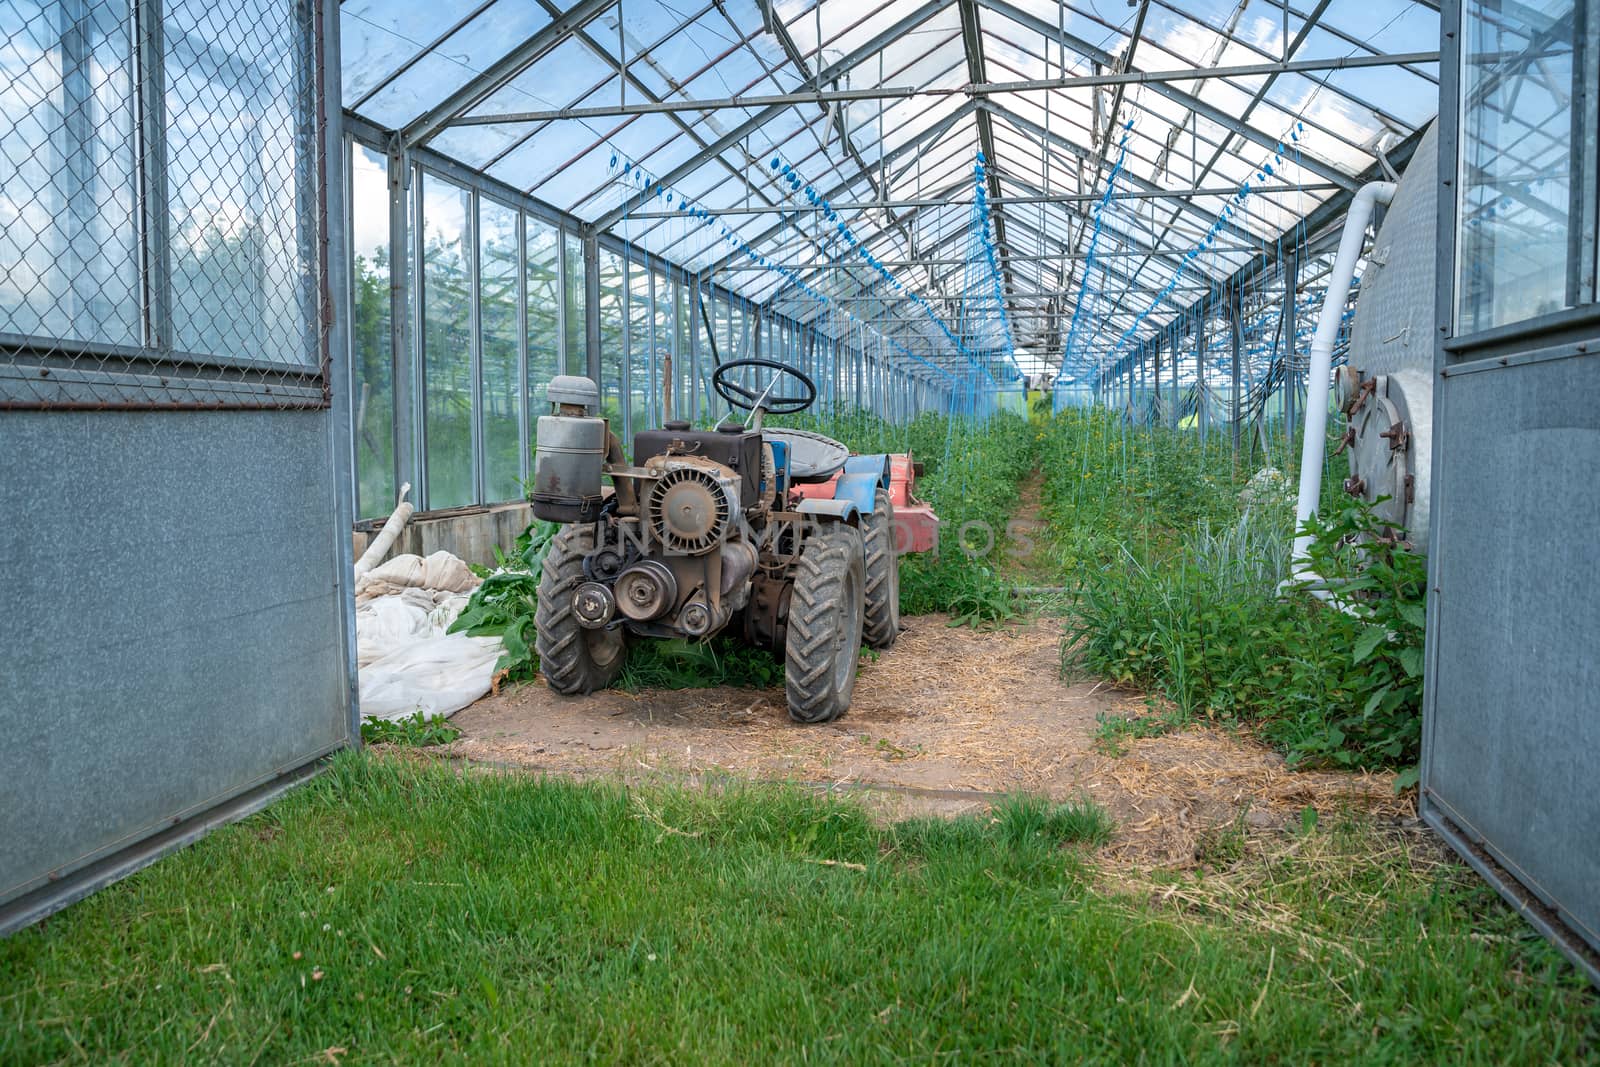 greenhouse on the farm for growing healthy vegetables without chemistry in organic quality by Edophoto